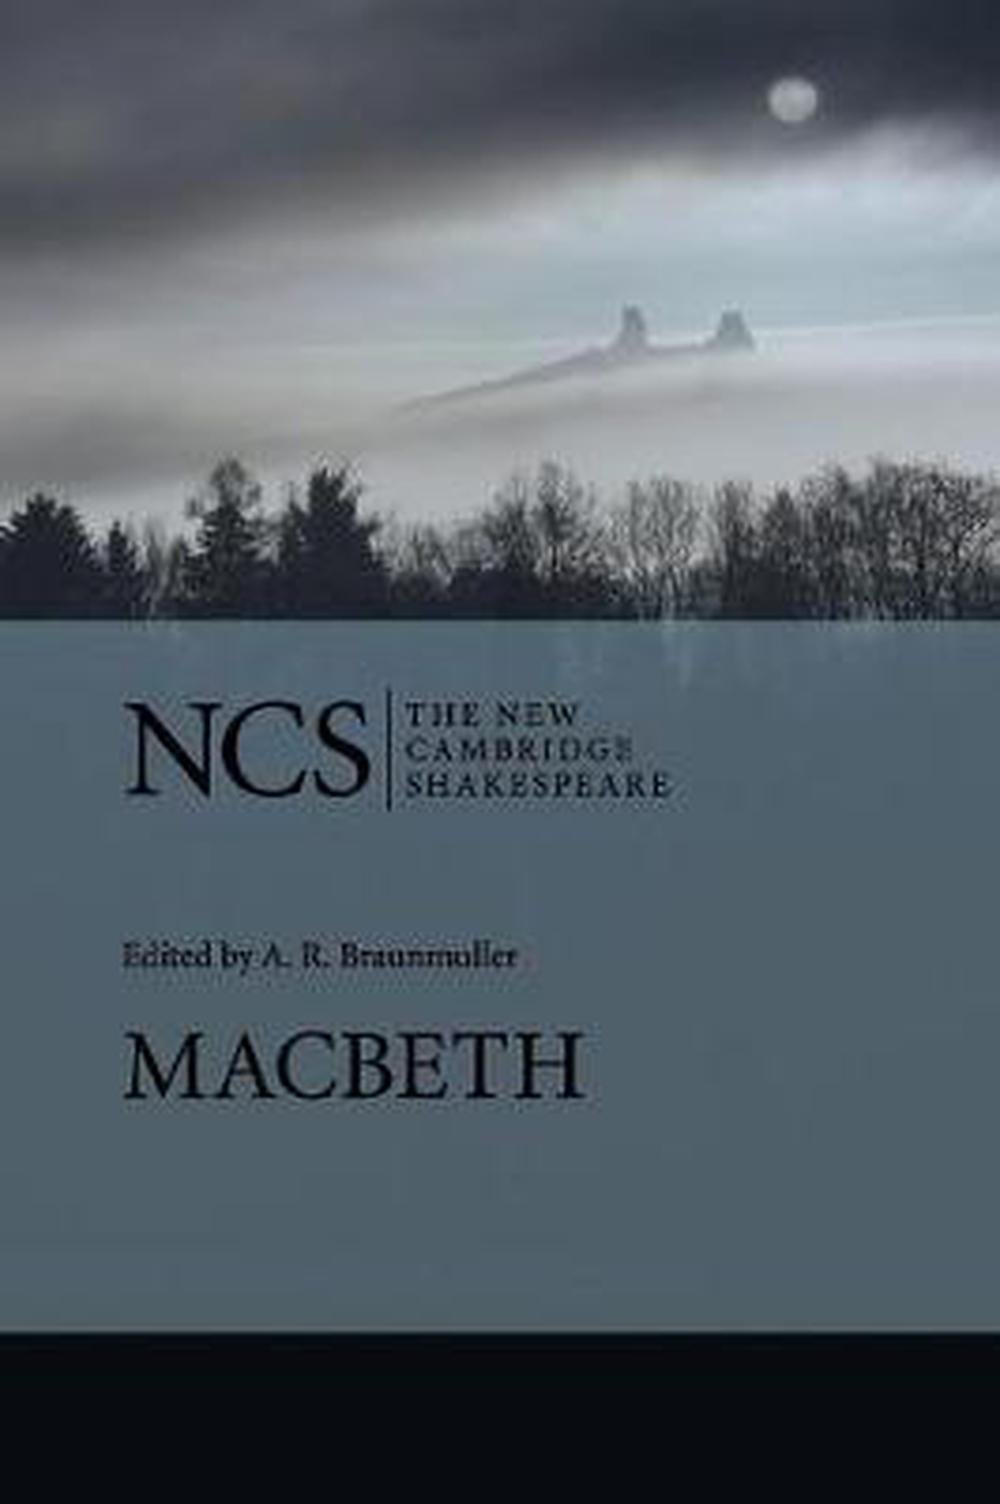 online　Paperback,　at　2ed　NCS:　William　Buy　Macbeth　9780521680981　The　by　Shakespeare,　Nile